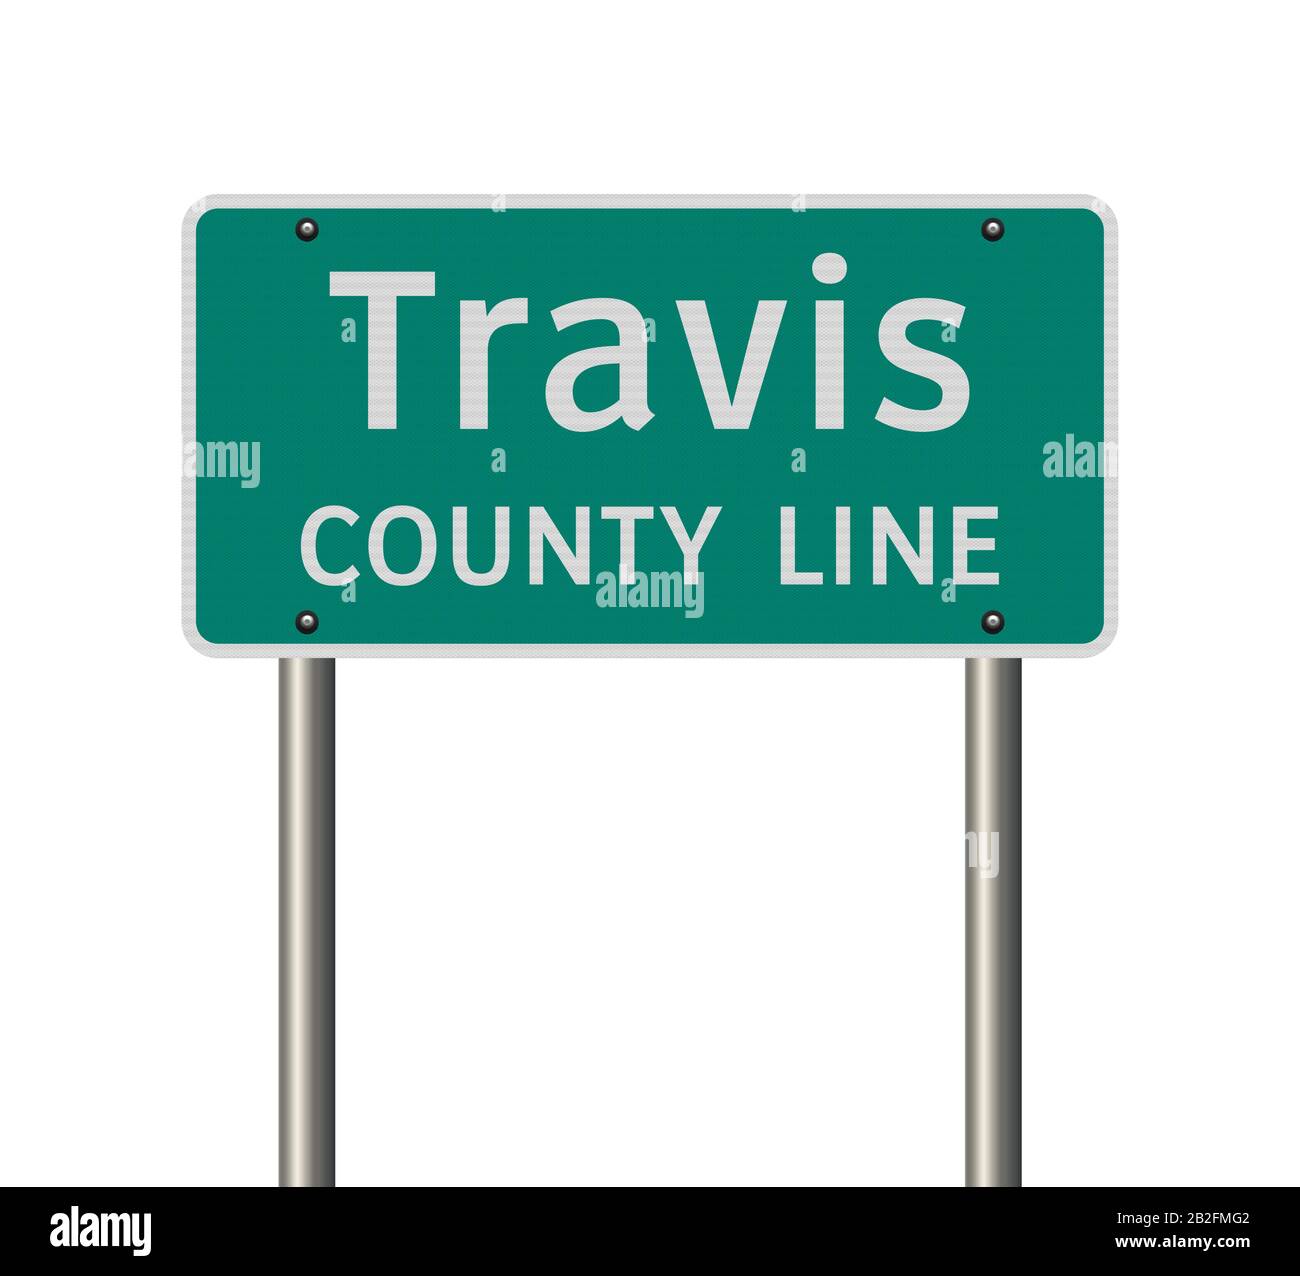 Vector illustration of the Travis County Line green road sign on metallic poles Stock Vector